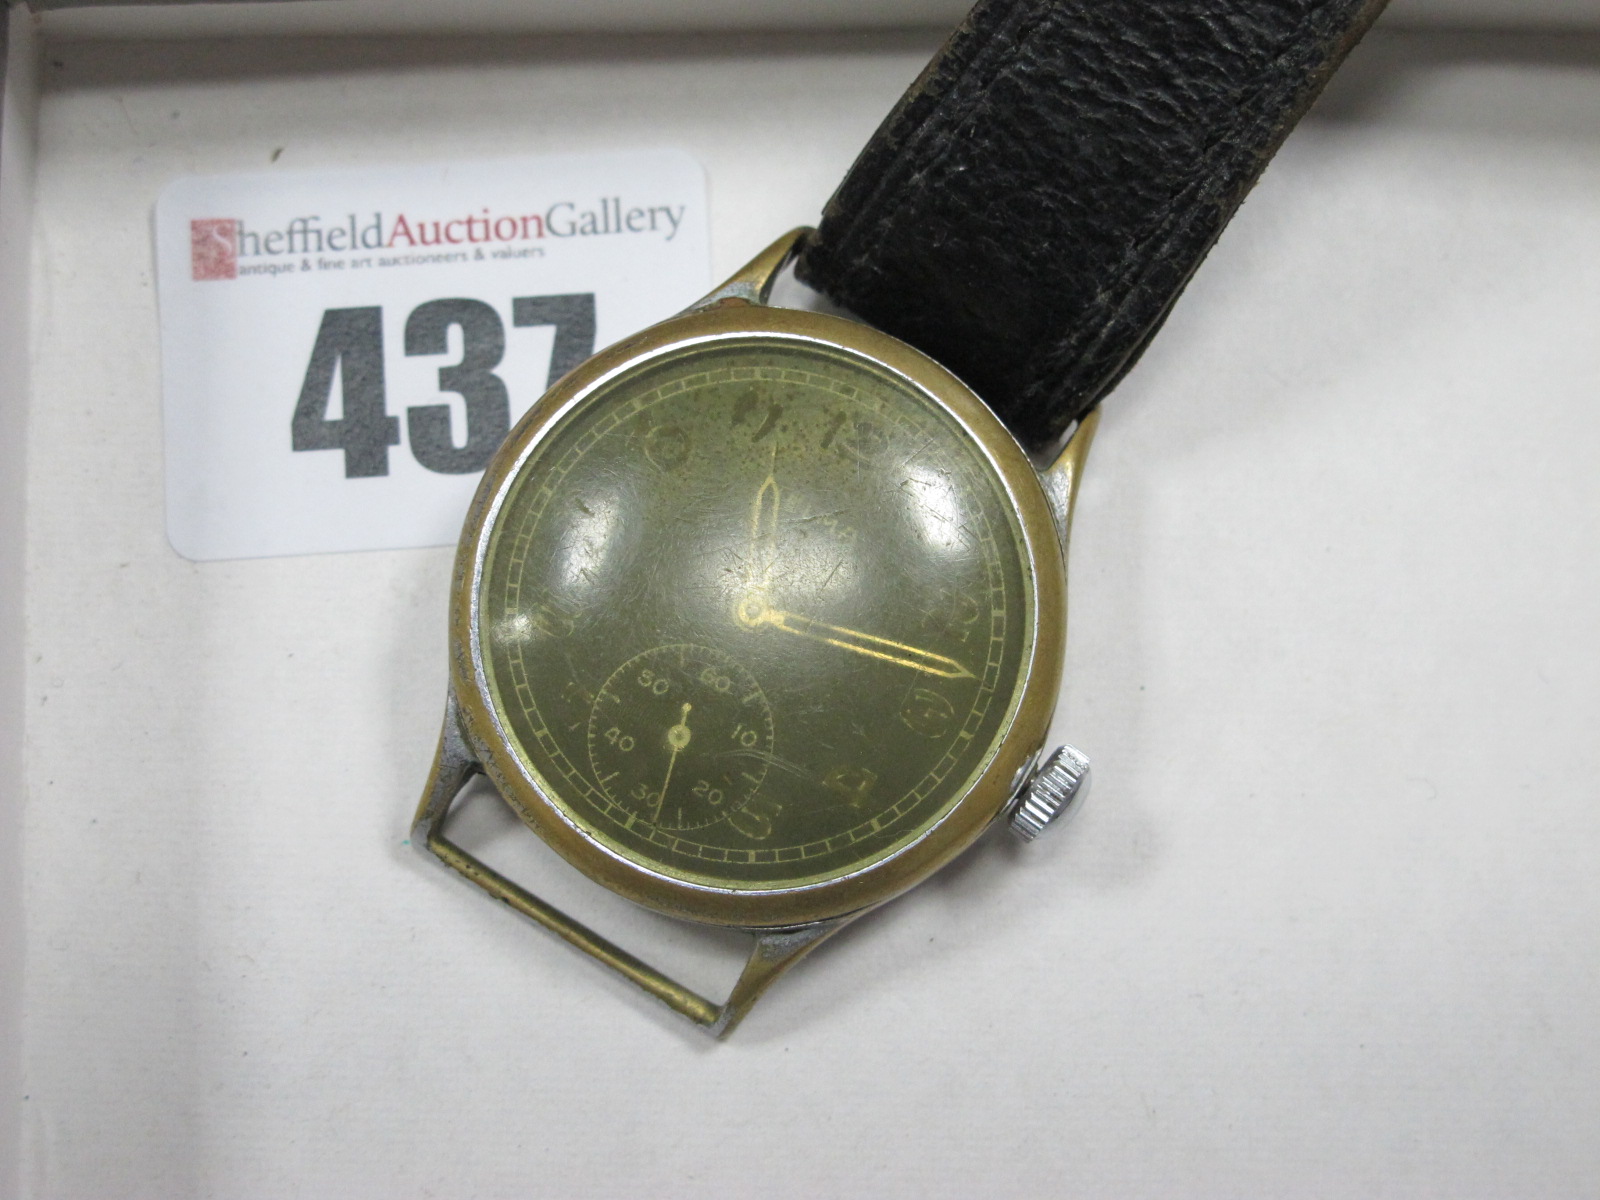 Helma: A Vintage Swiss Military Made Mechanical Wristwatch, by Helma, known as a "D-H" Service